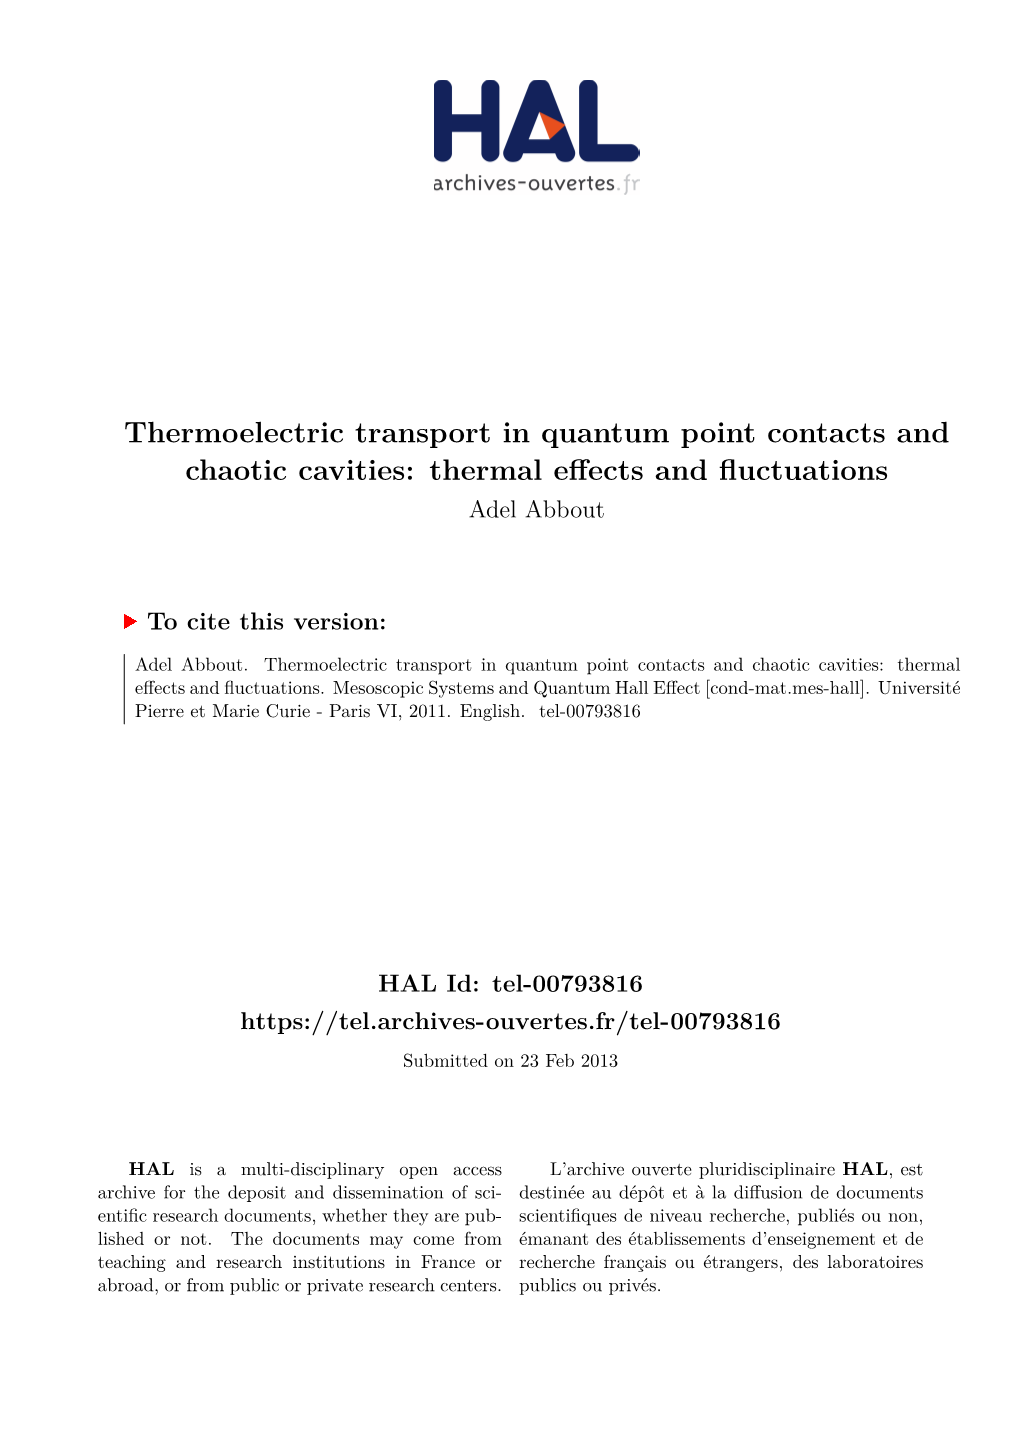 Thermoelectric Transport in Quantum Point Contacts and Chaotic Cavities: Thermal Effects and Fluctuations Adel Abbout